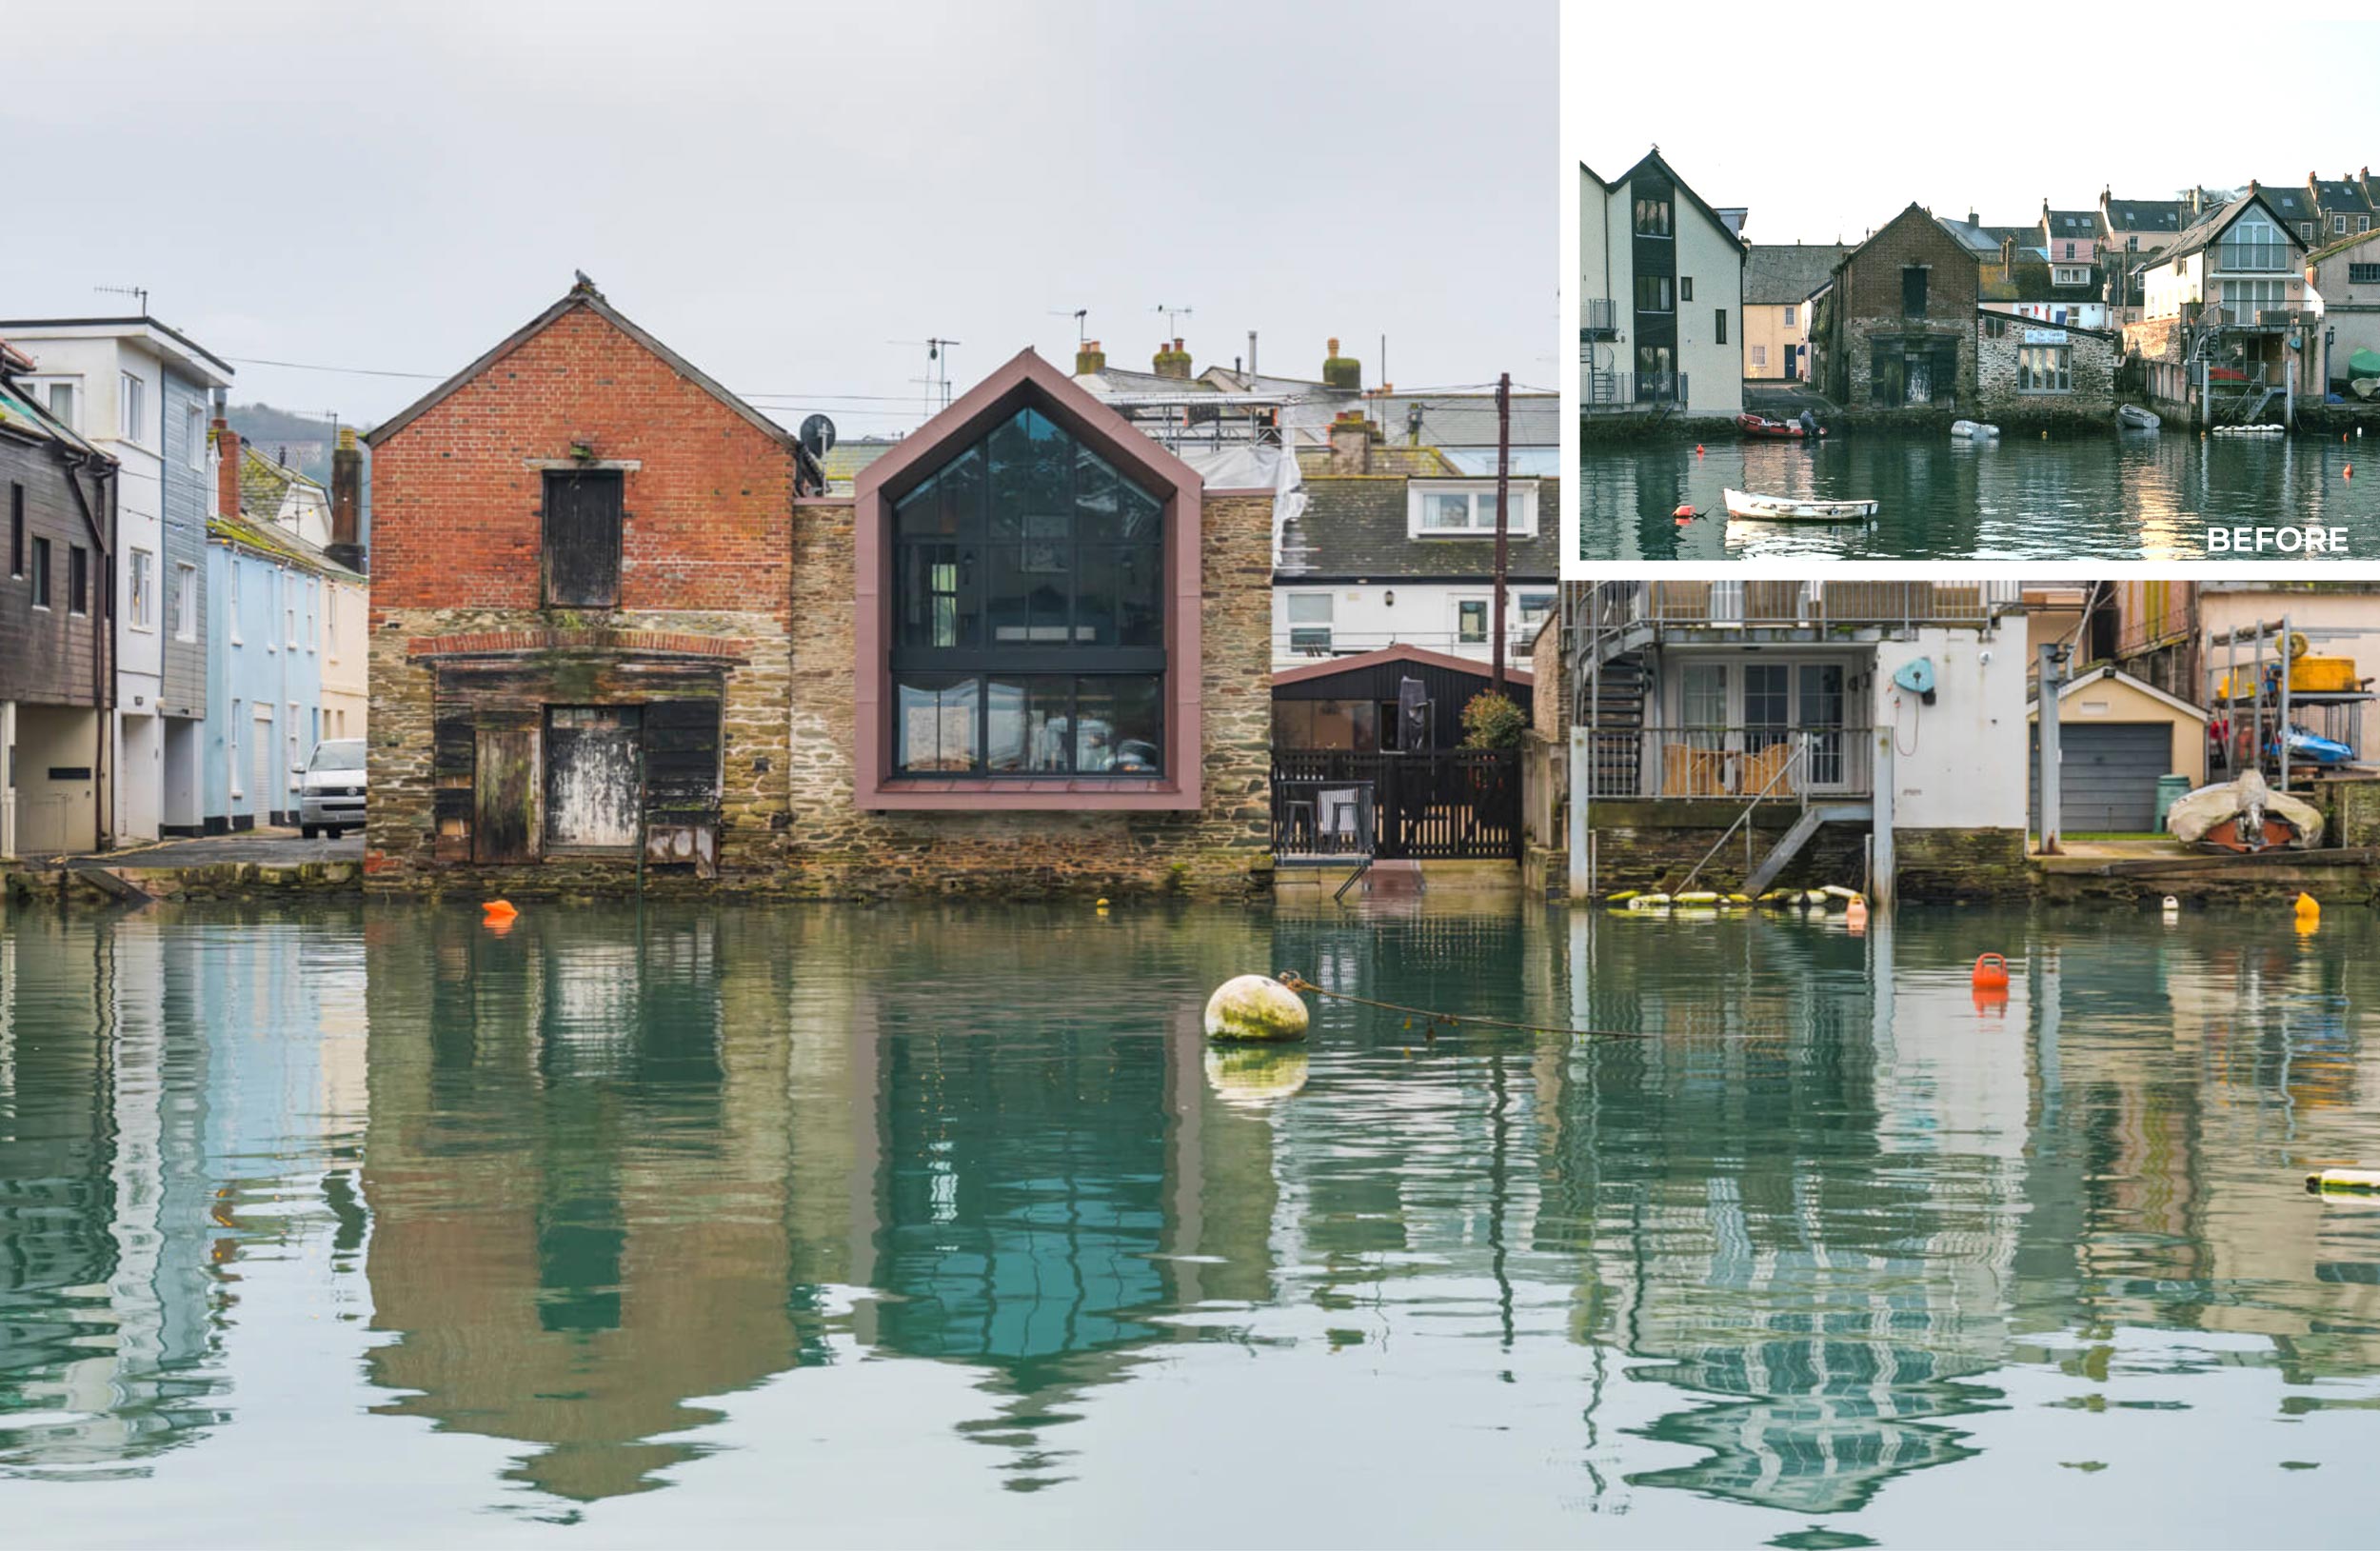 Cottles Quay Amphibious Staycation Before and After Image